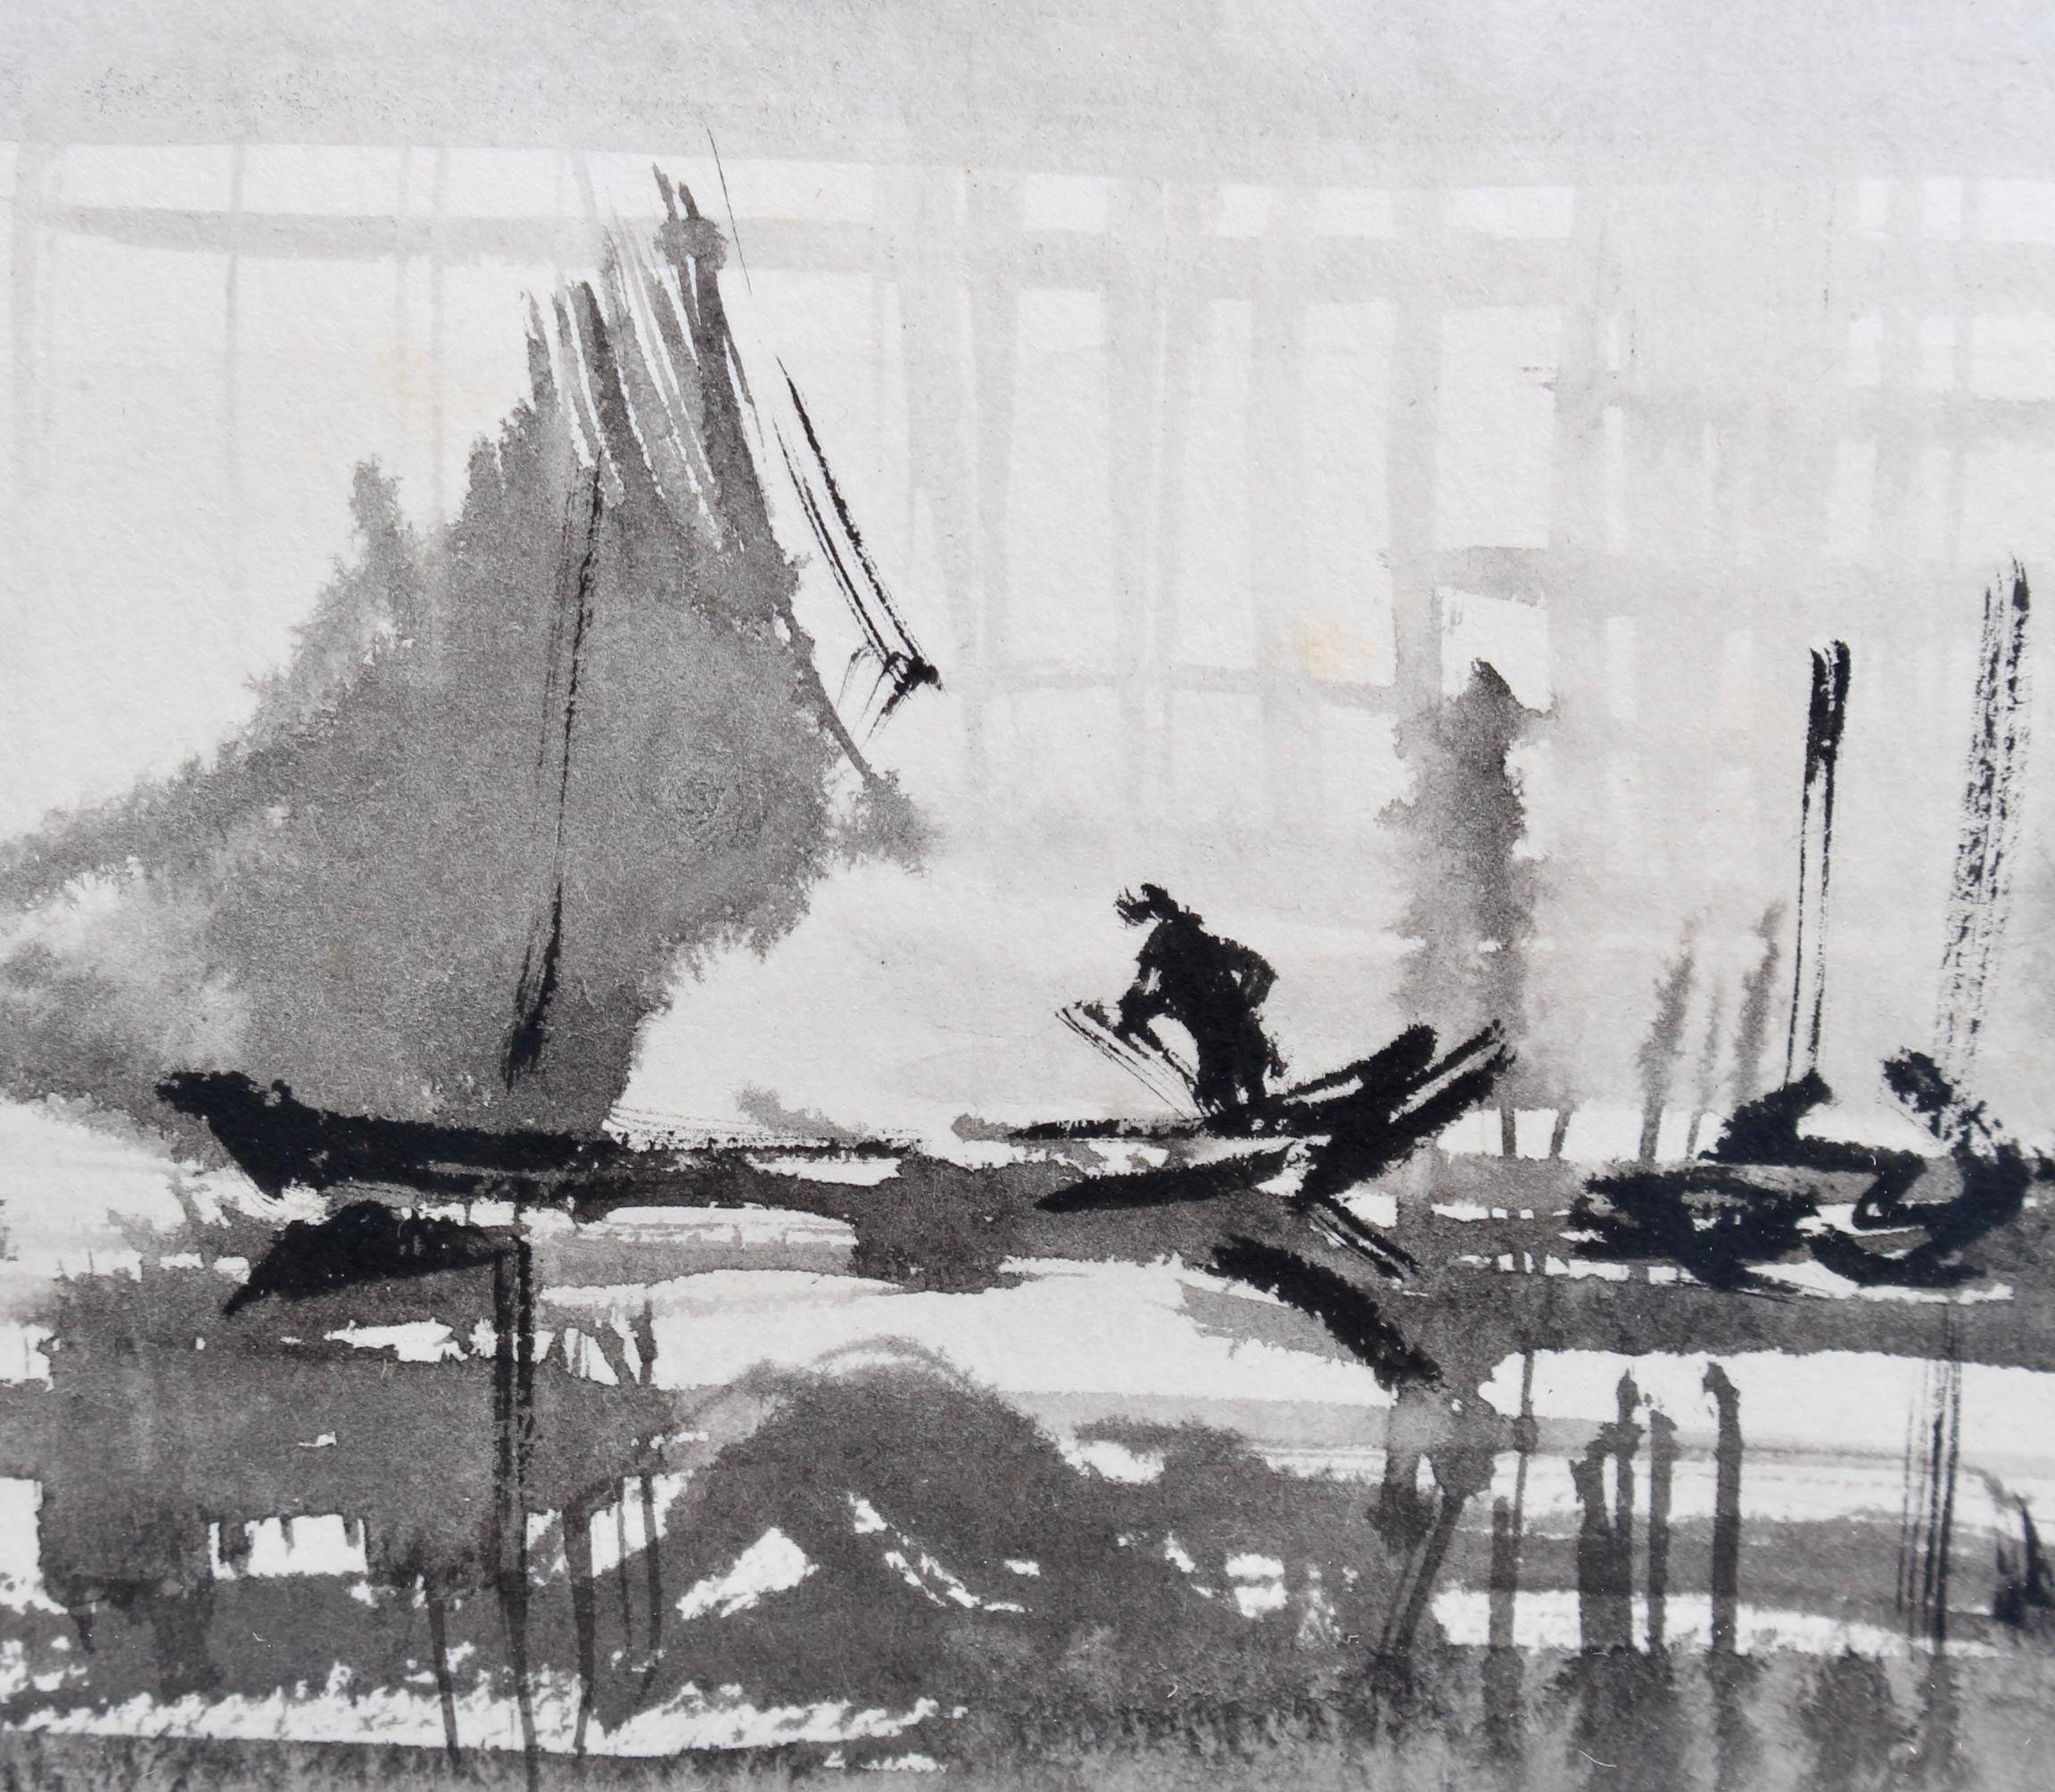 'Raining in Formosa on the Tamsui River' by Ran In-Ting (Lan Yinding, 藍蔭鼎) For Sale 9